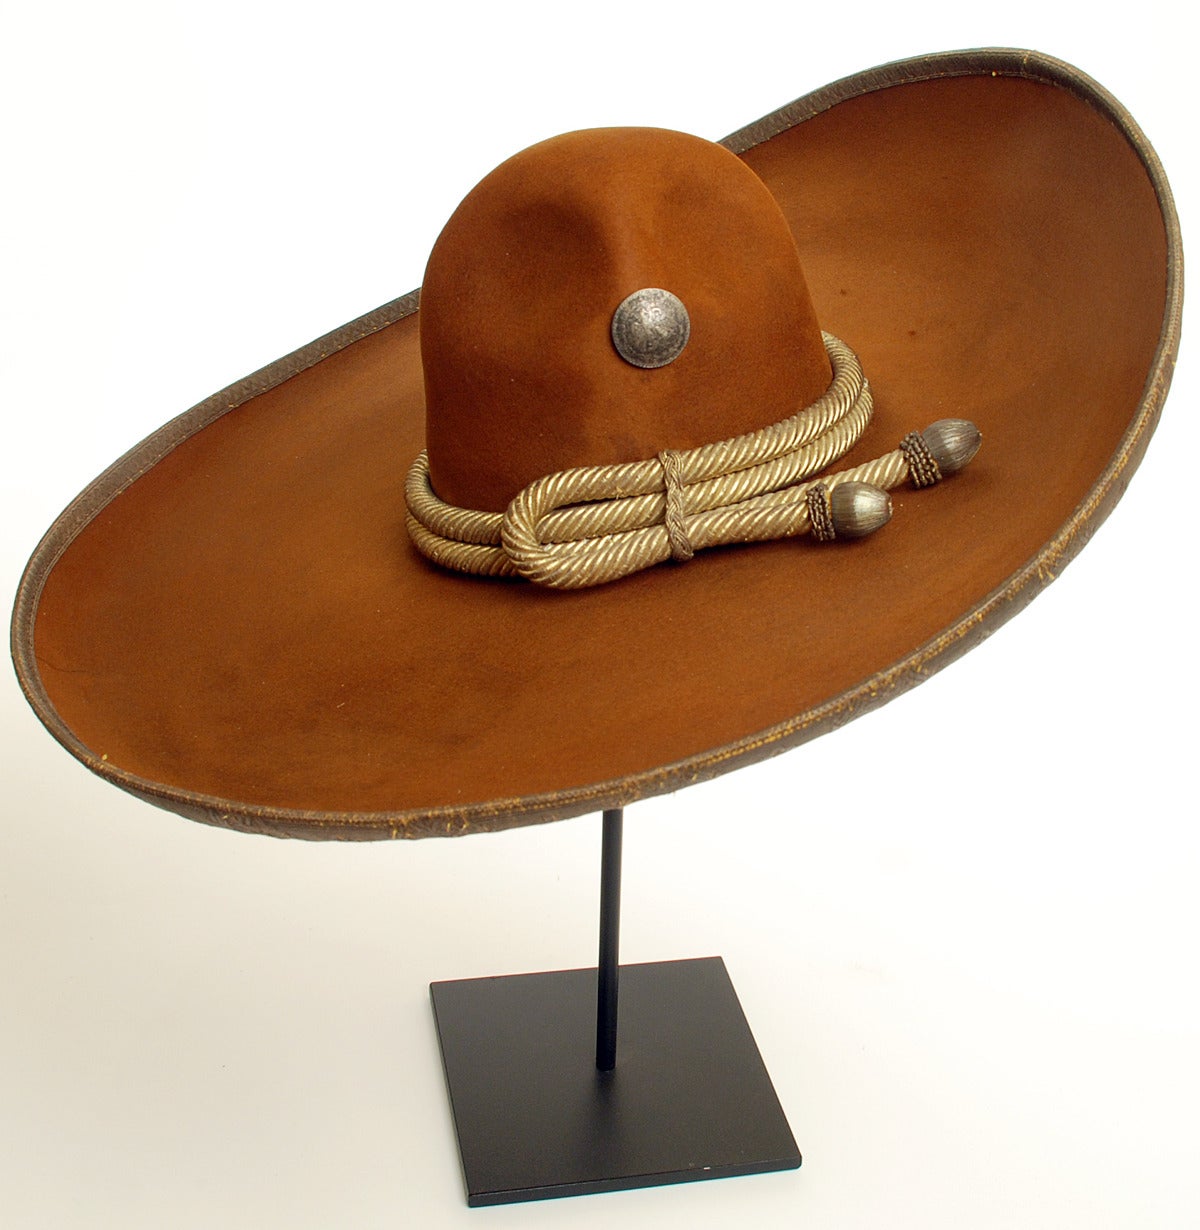 A handsome early 20th century Mexican felt sombrero with original gold threaded fiber cord, silver threaded tassels, and metallic threaded trim - studded with early Mexican silver conchos. Circa 1920. Displayed on a high quality custom made stand.